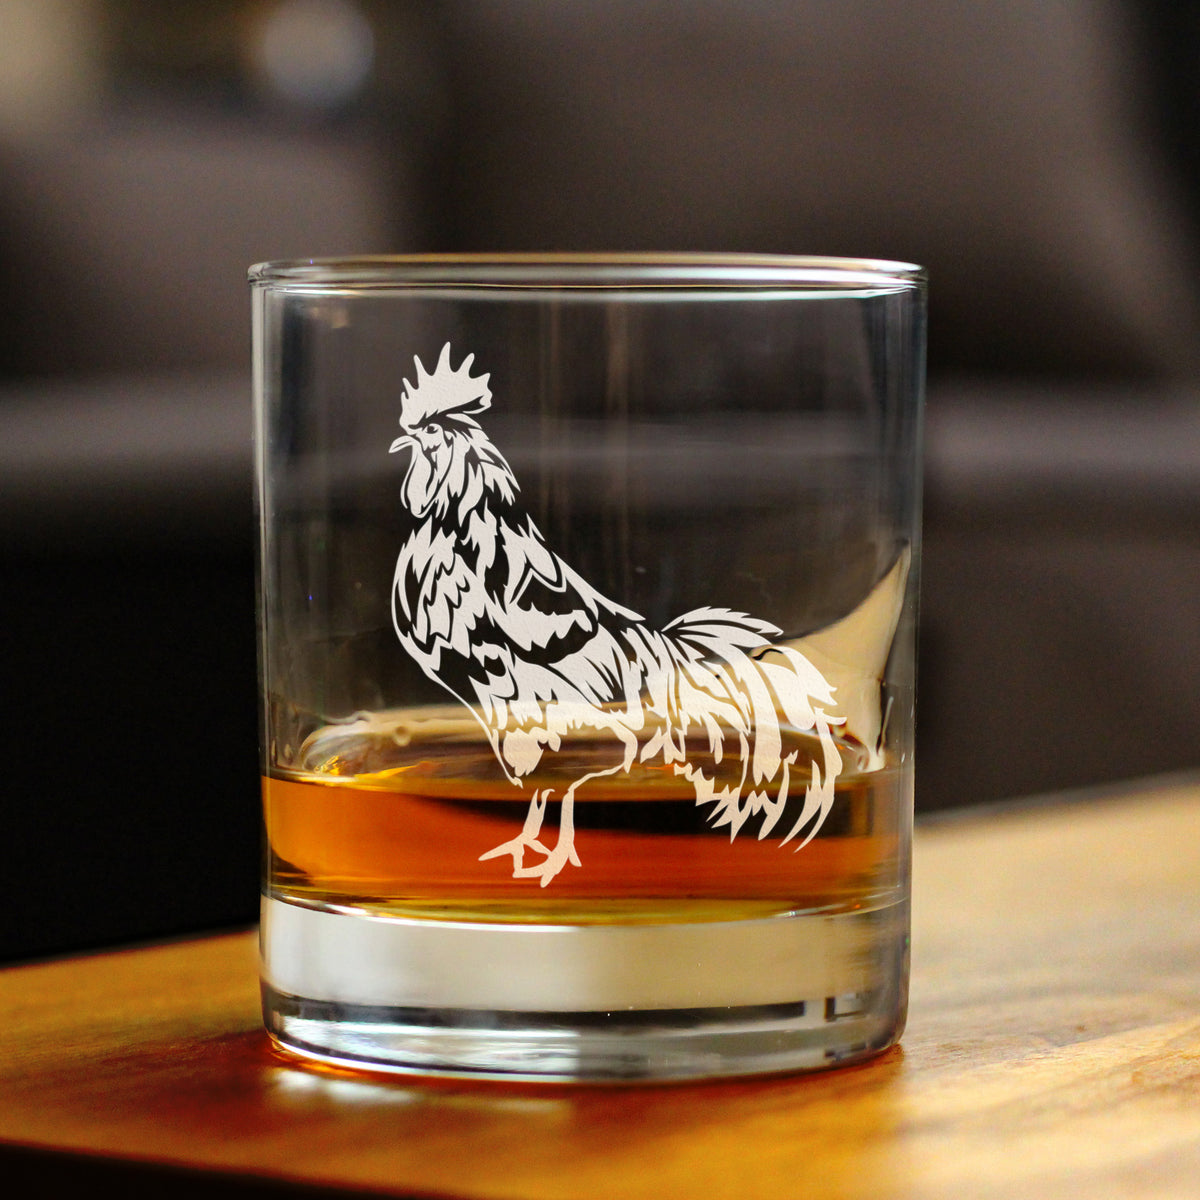 Rooster Whiskey Rocks Glass - Unique Funny Farm Animal Themed Decor and Chicken Gifts - 10.25 Oz